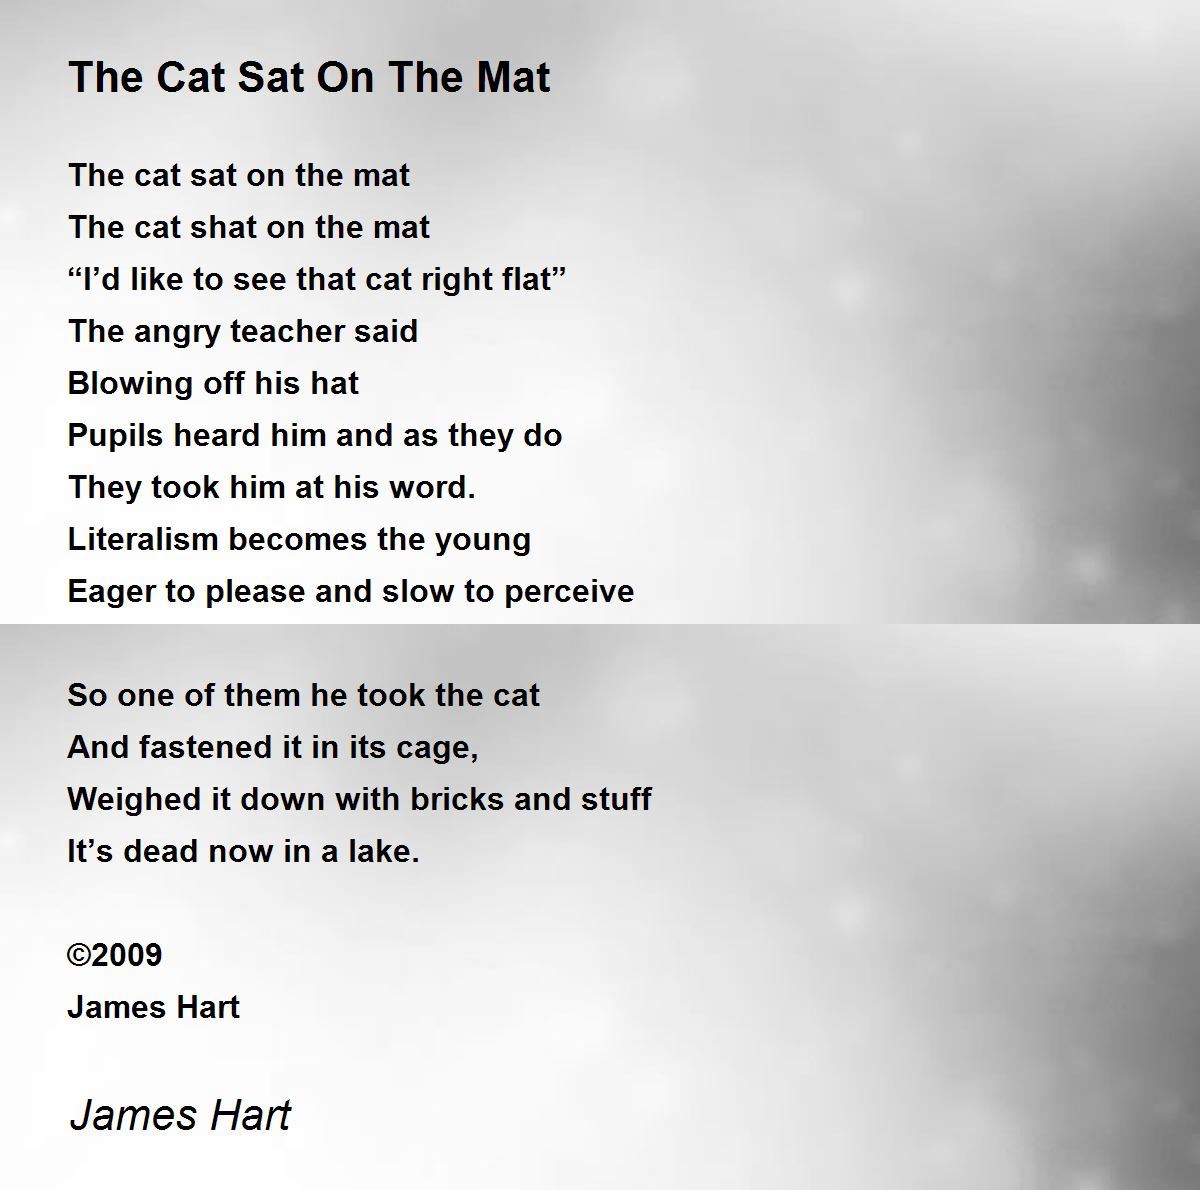 The Cat Sat On The Mat - The Cat Sat On The Mat Poem by James Hart